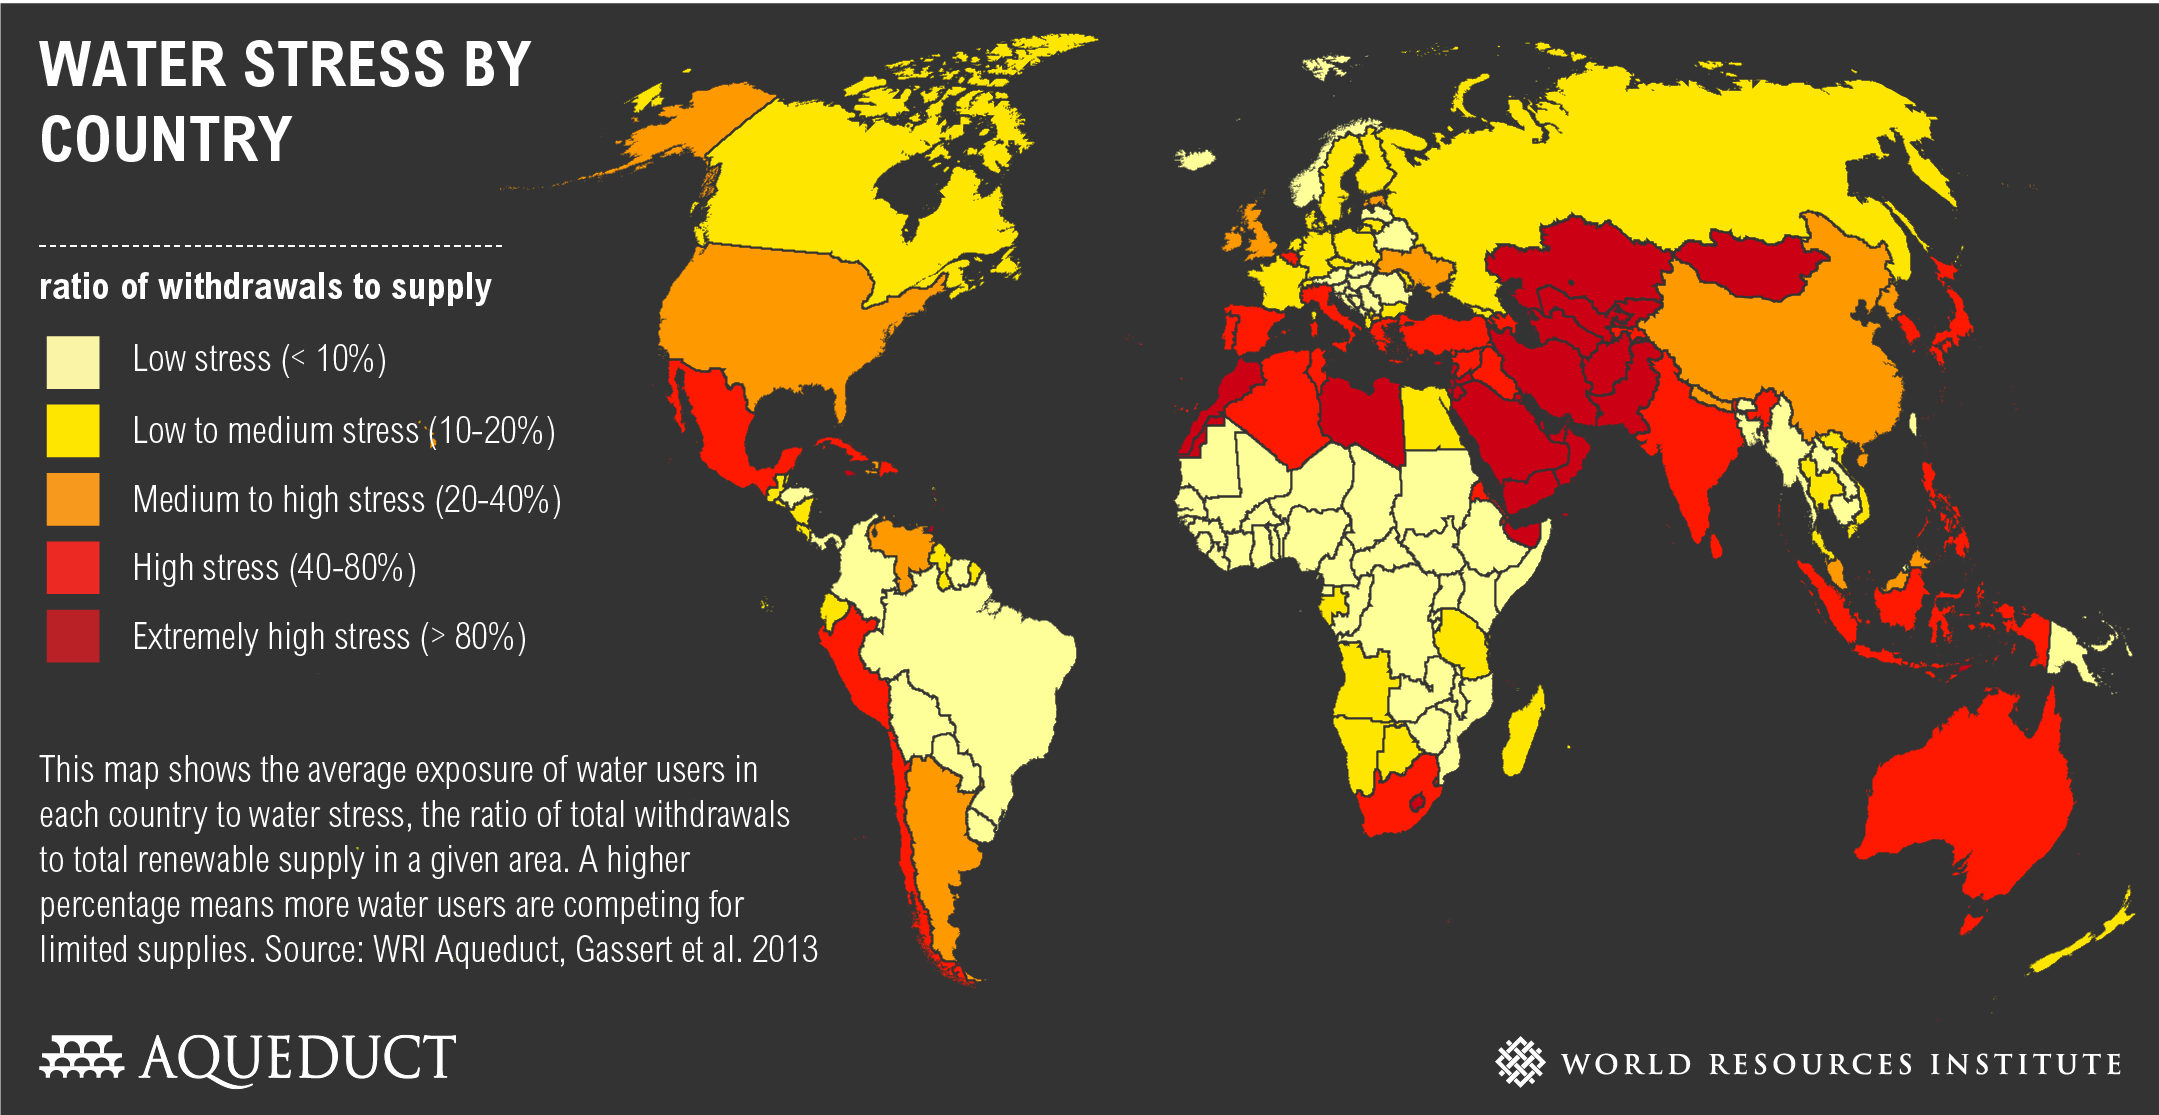 http://www.wri.org/blog/2013/12/world’s-36-most-water-stressed-countries